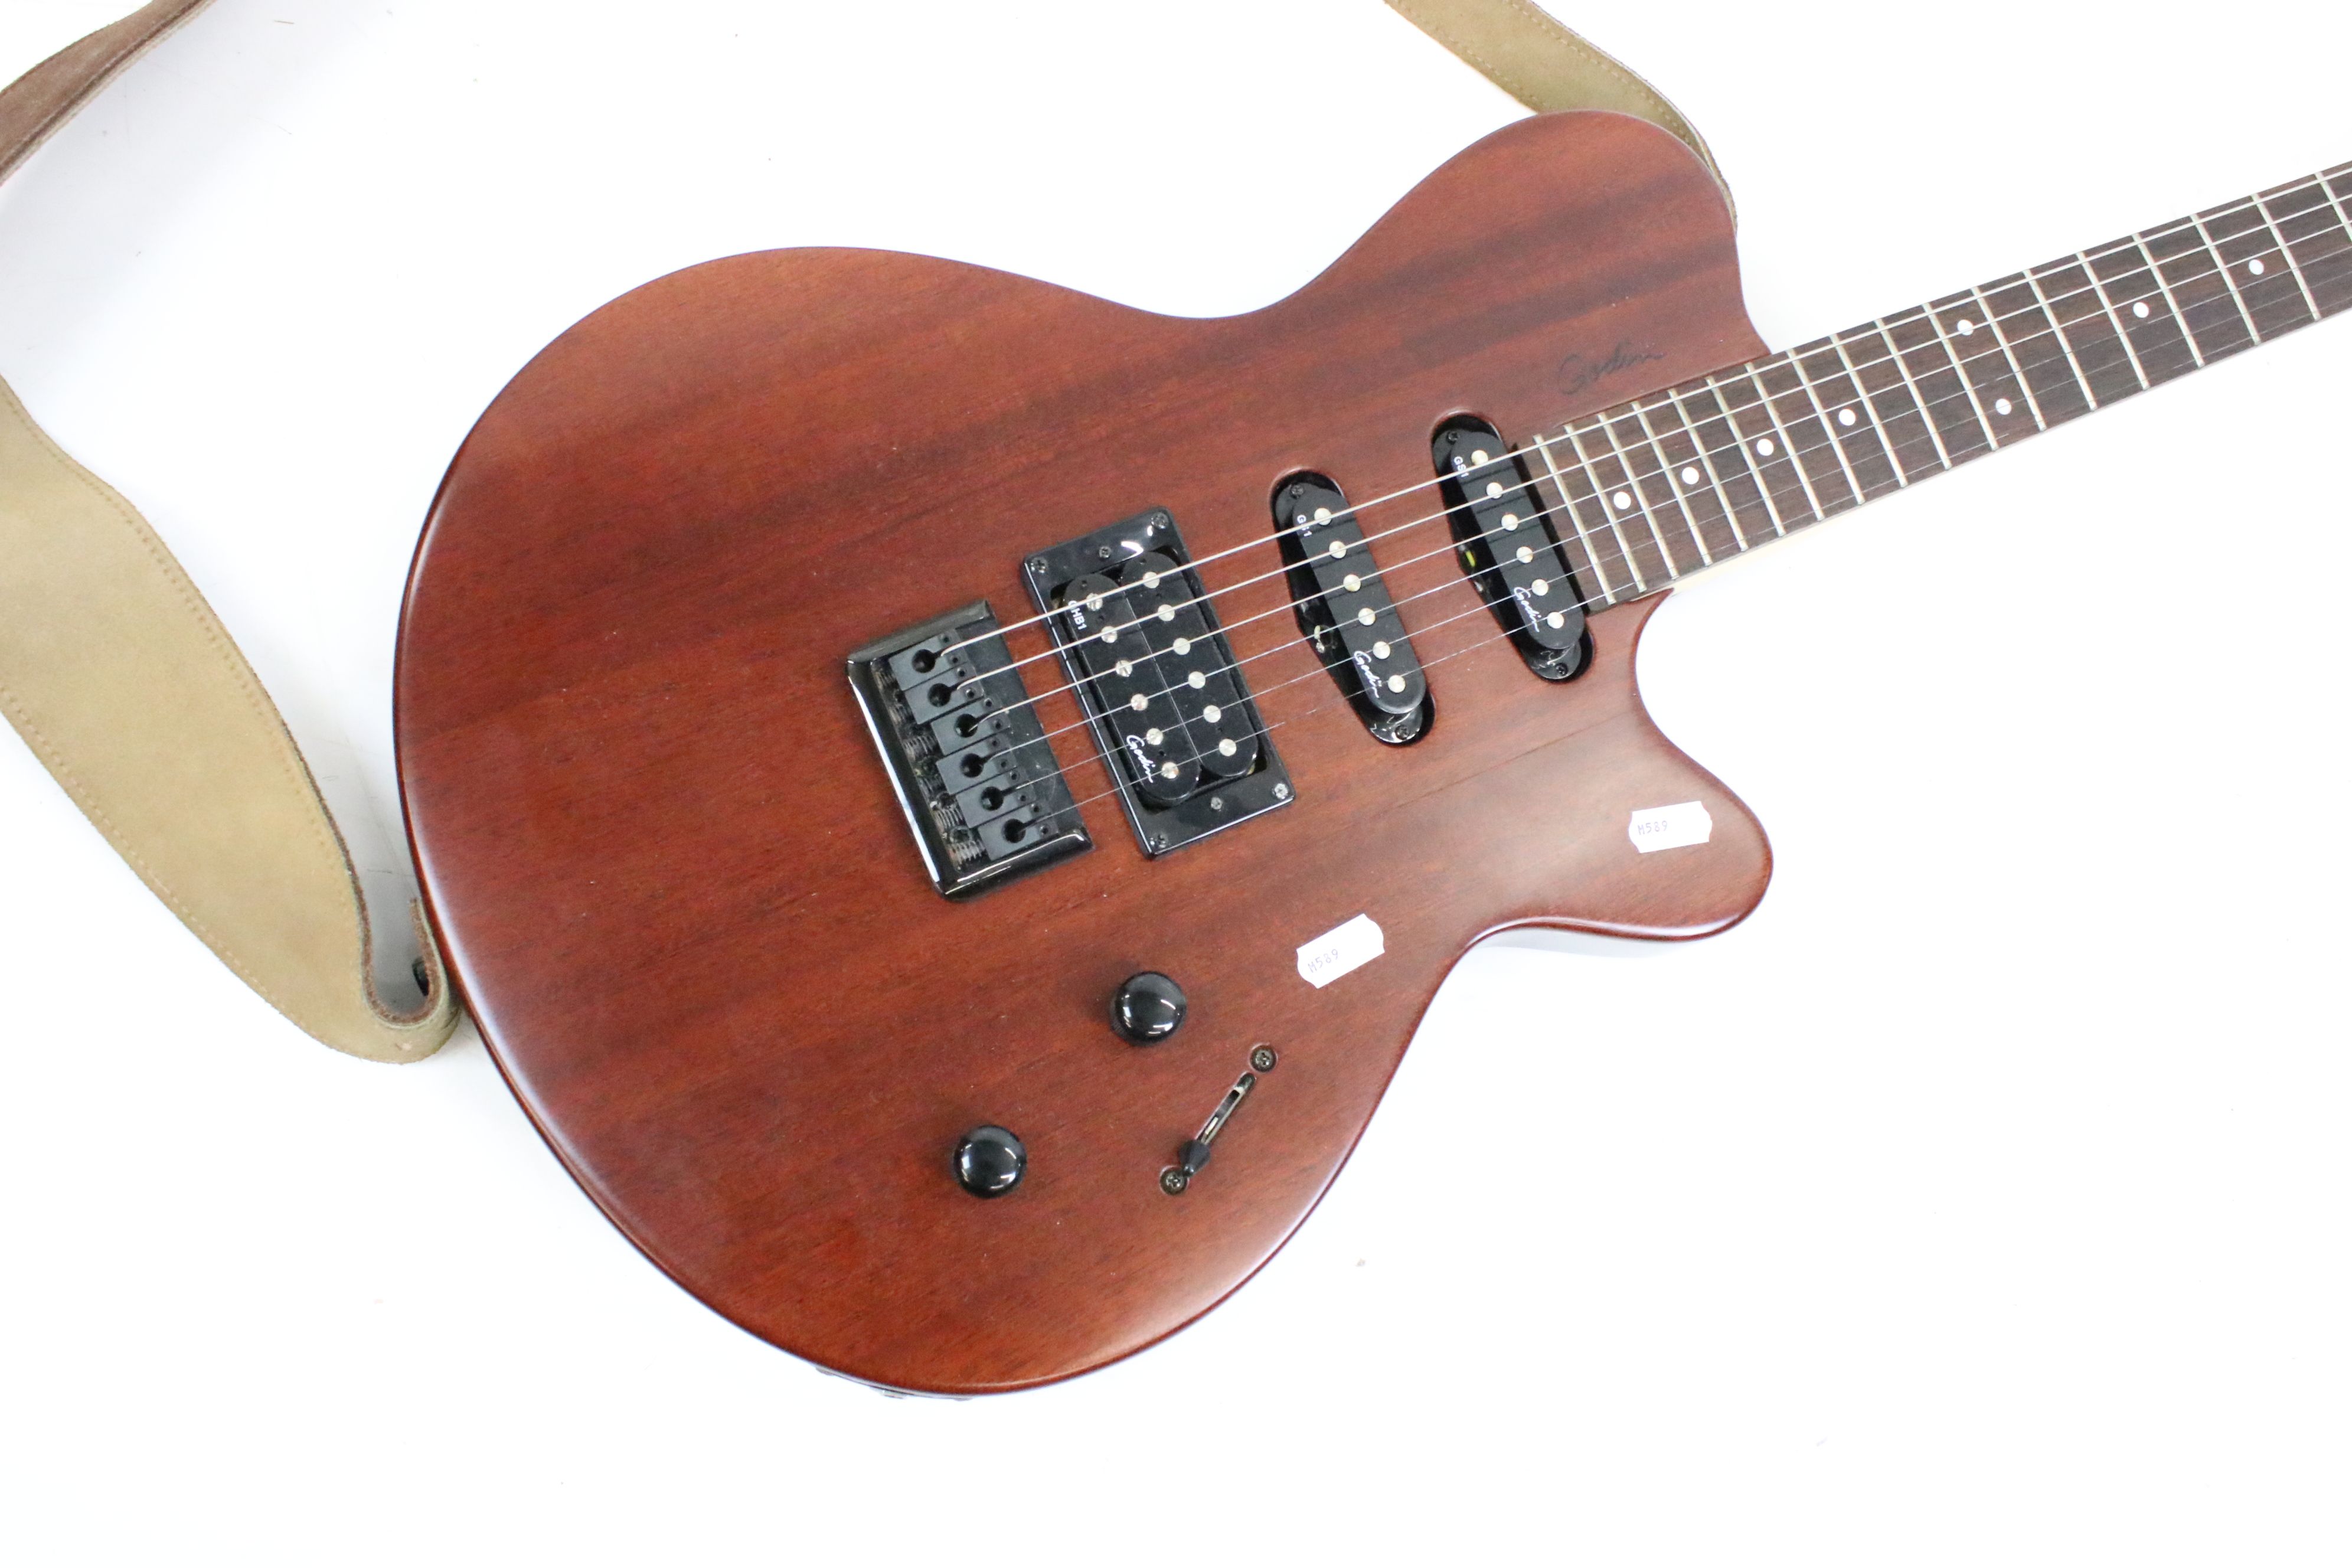 A USA made Godin Exit 22-S six string electric guitar. - Image 3 of 4